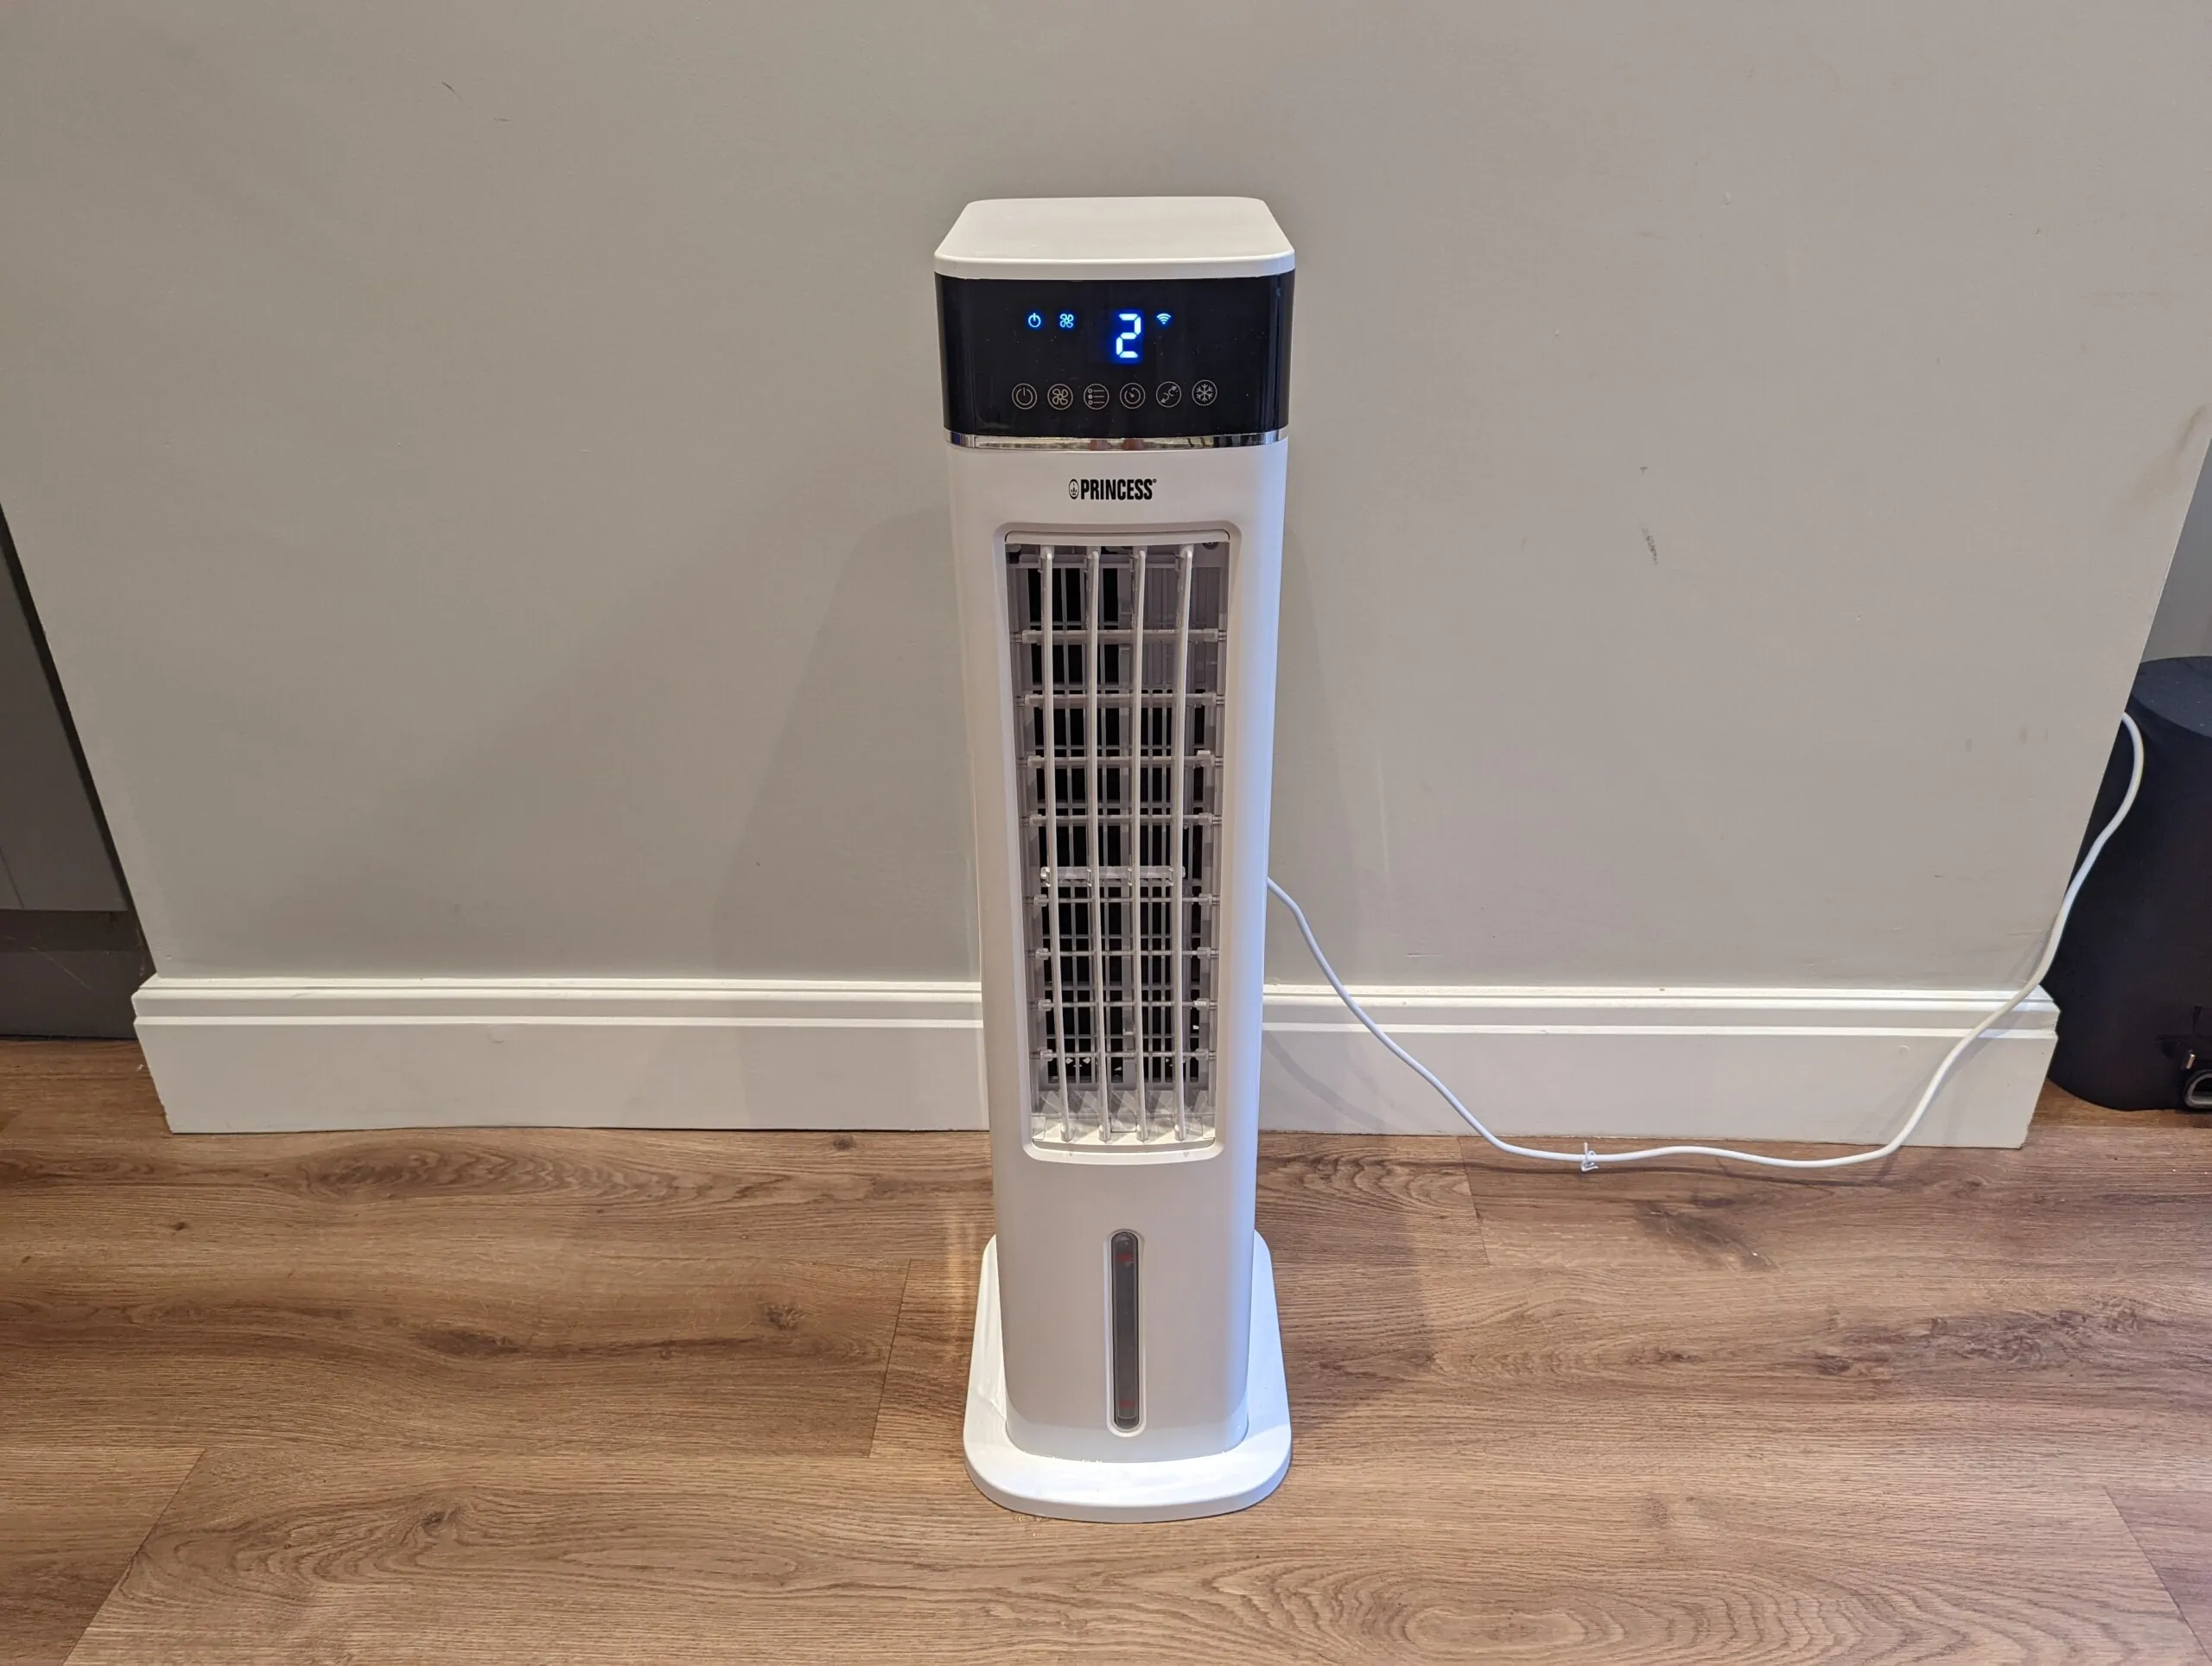 Princess Smart Air Cooler Review – A cheap alternative to air conditioning, but is it effective?